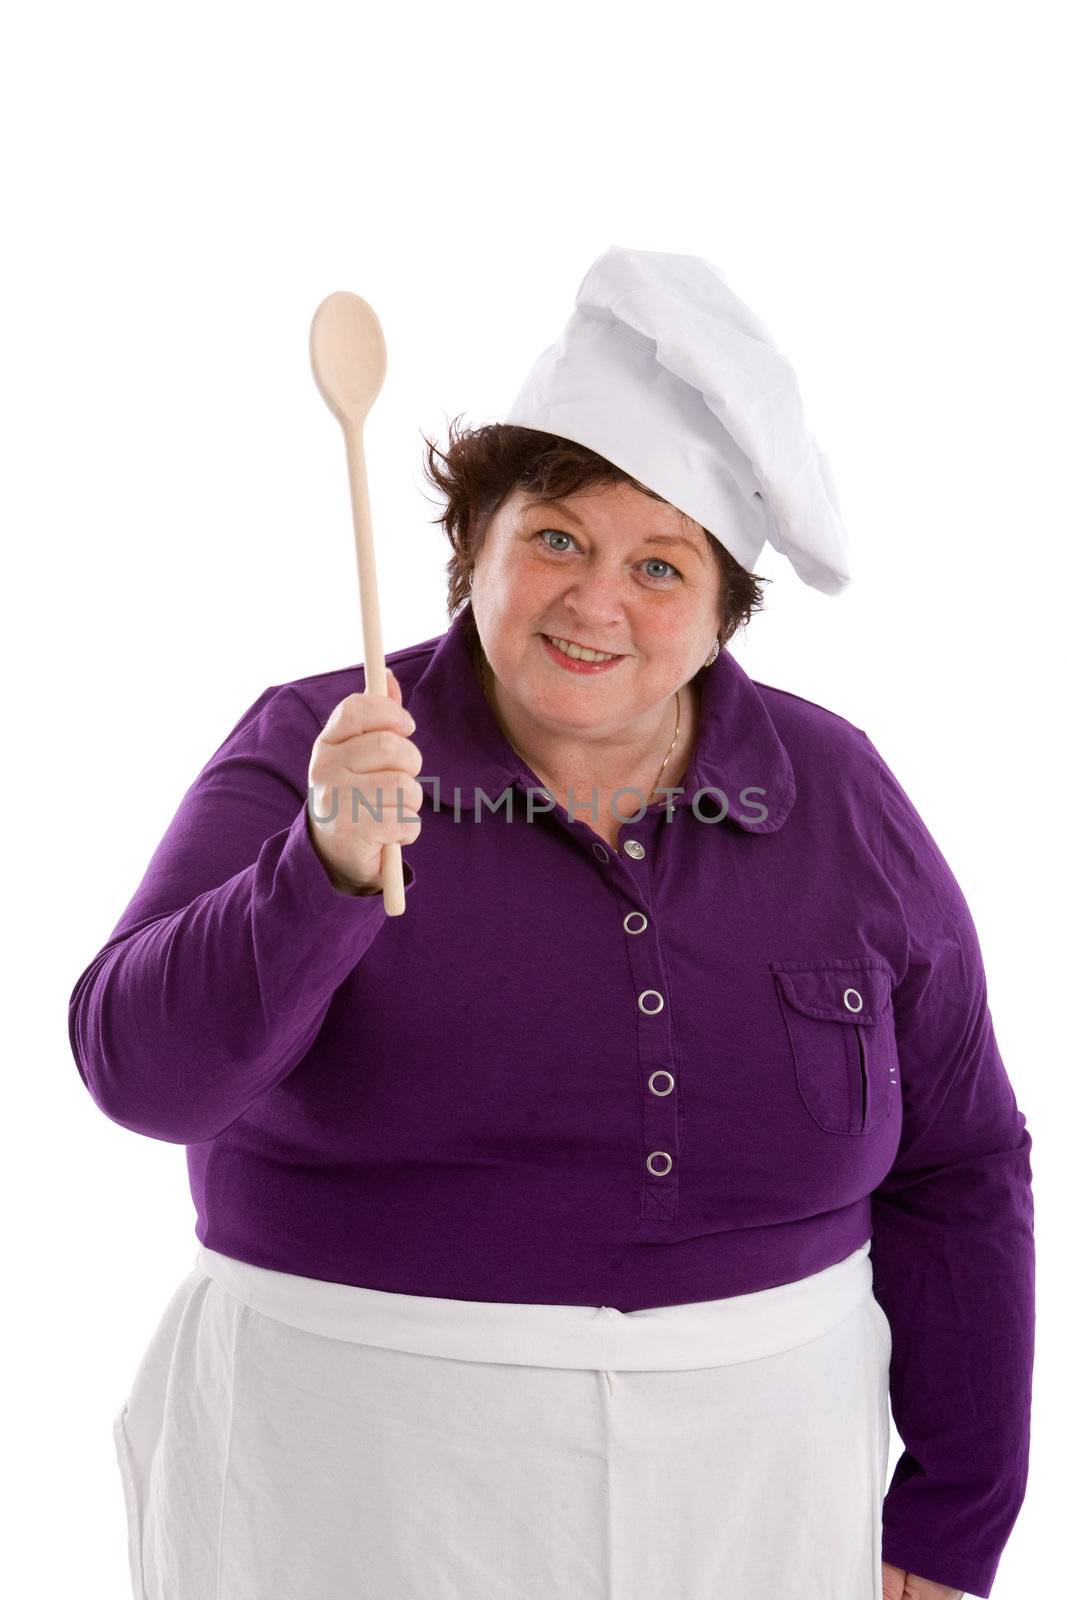 50 year old lady waving her wooden spoon wearing a chef's hat and apron